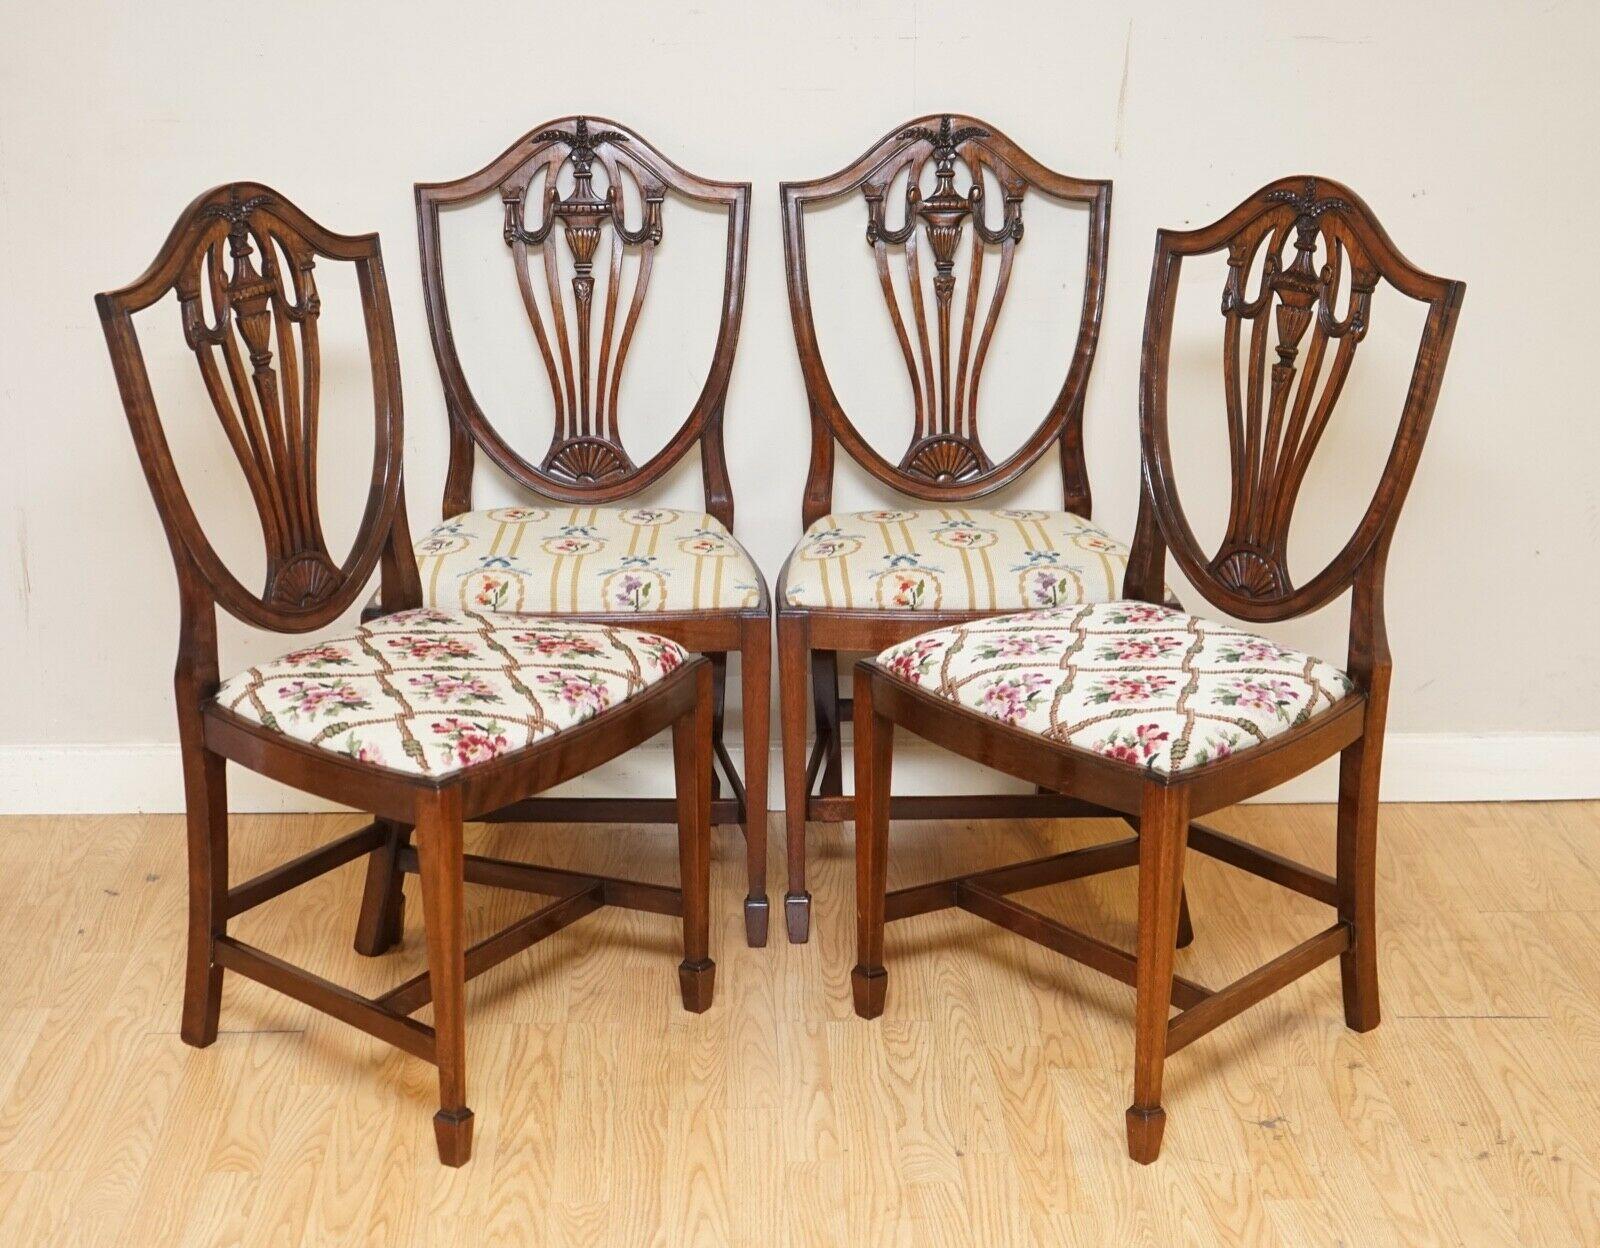 We are so excited to present to you this lovely Vintage set of 6 dining chairs.

Please carefully look at the pictures to see the condition before purchasing as they form part of the description. 



Measurements

Height - 100 cm
Width - 54